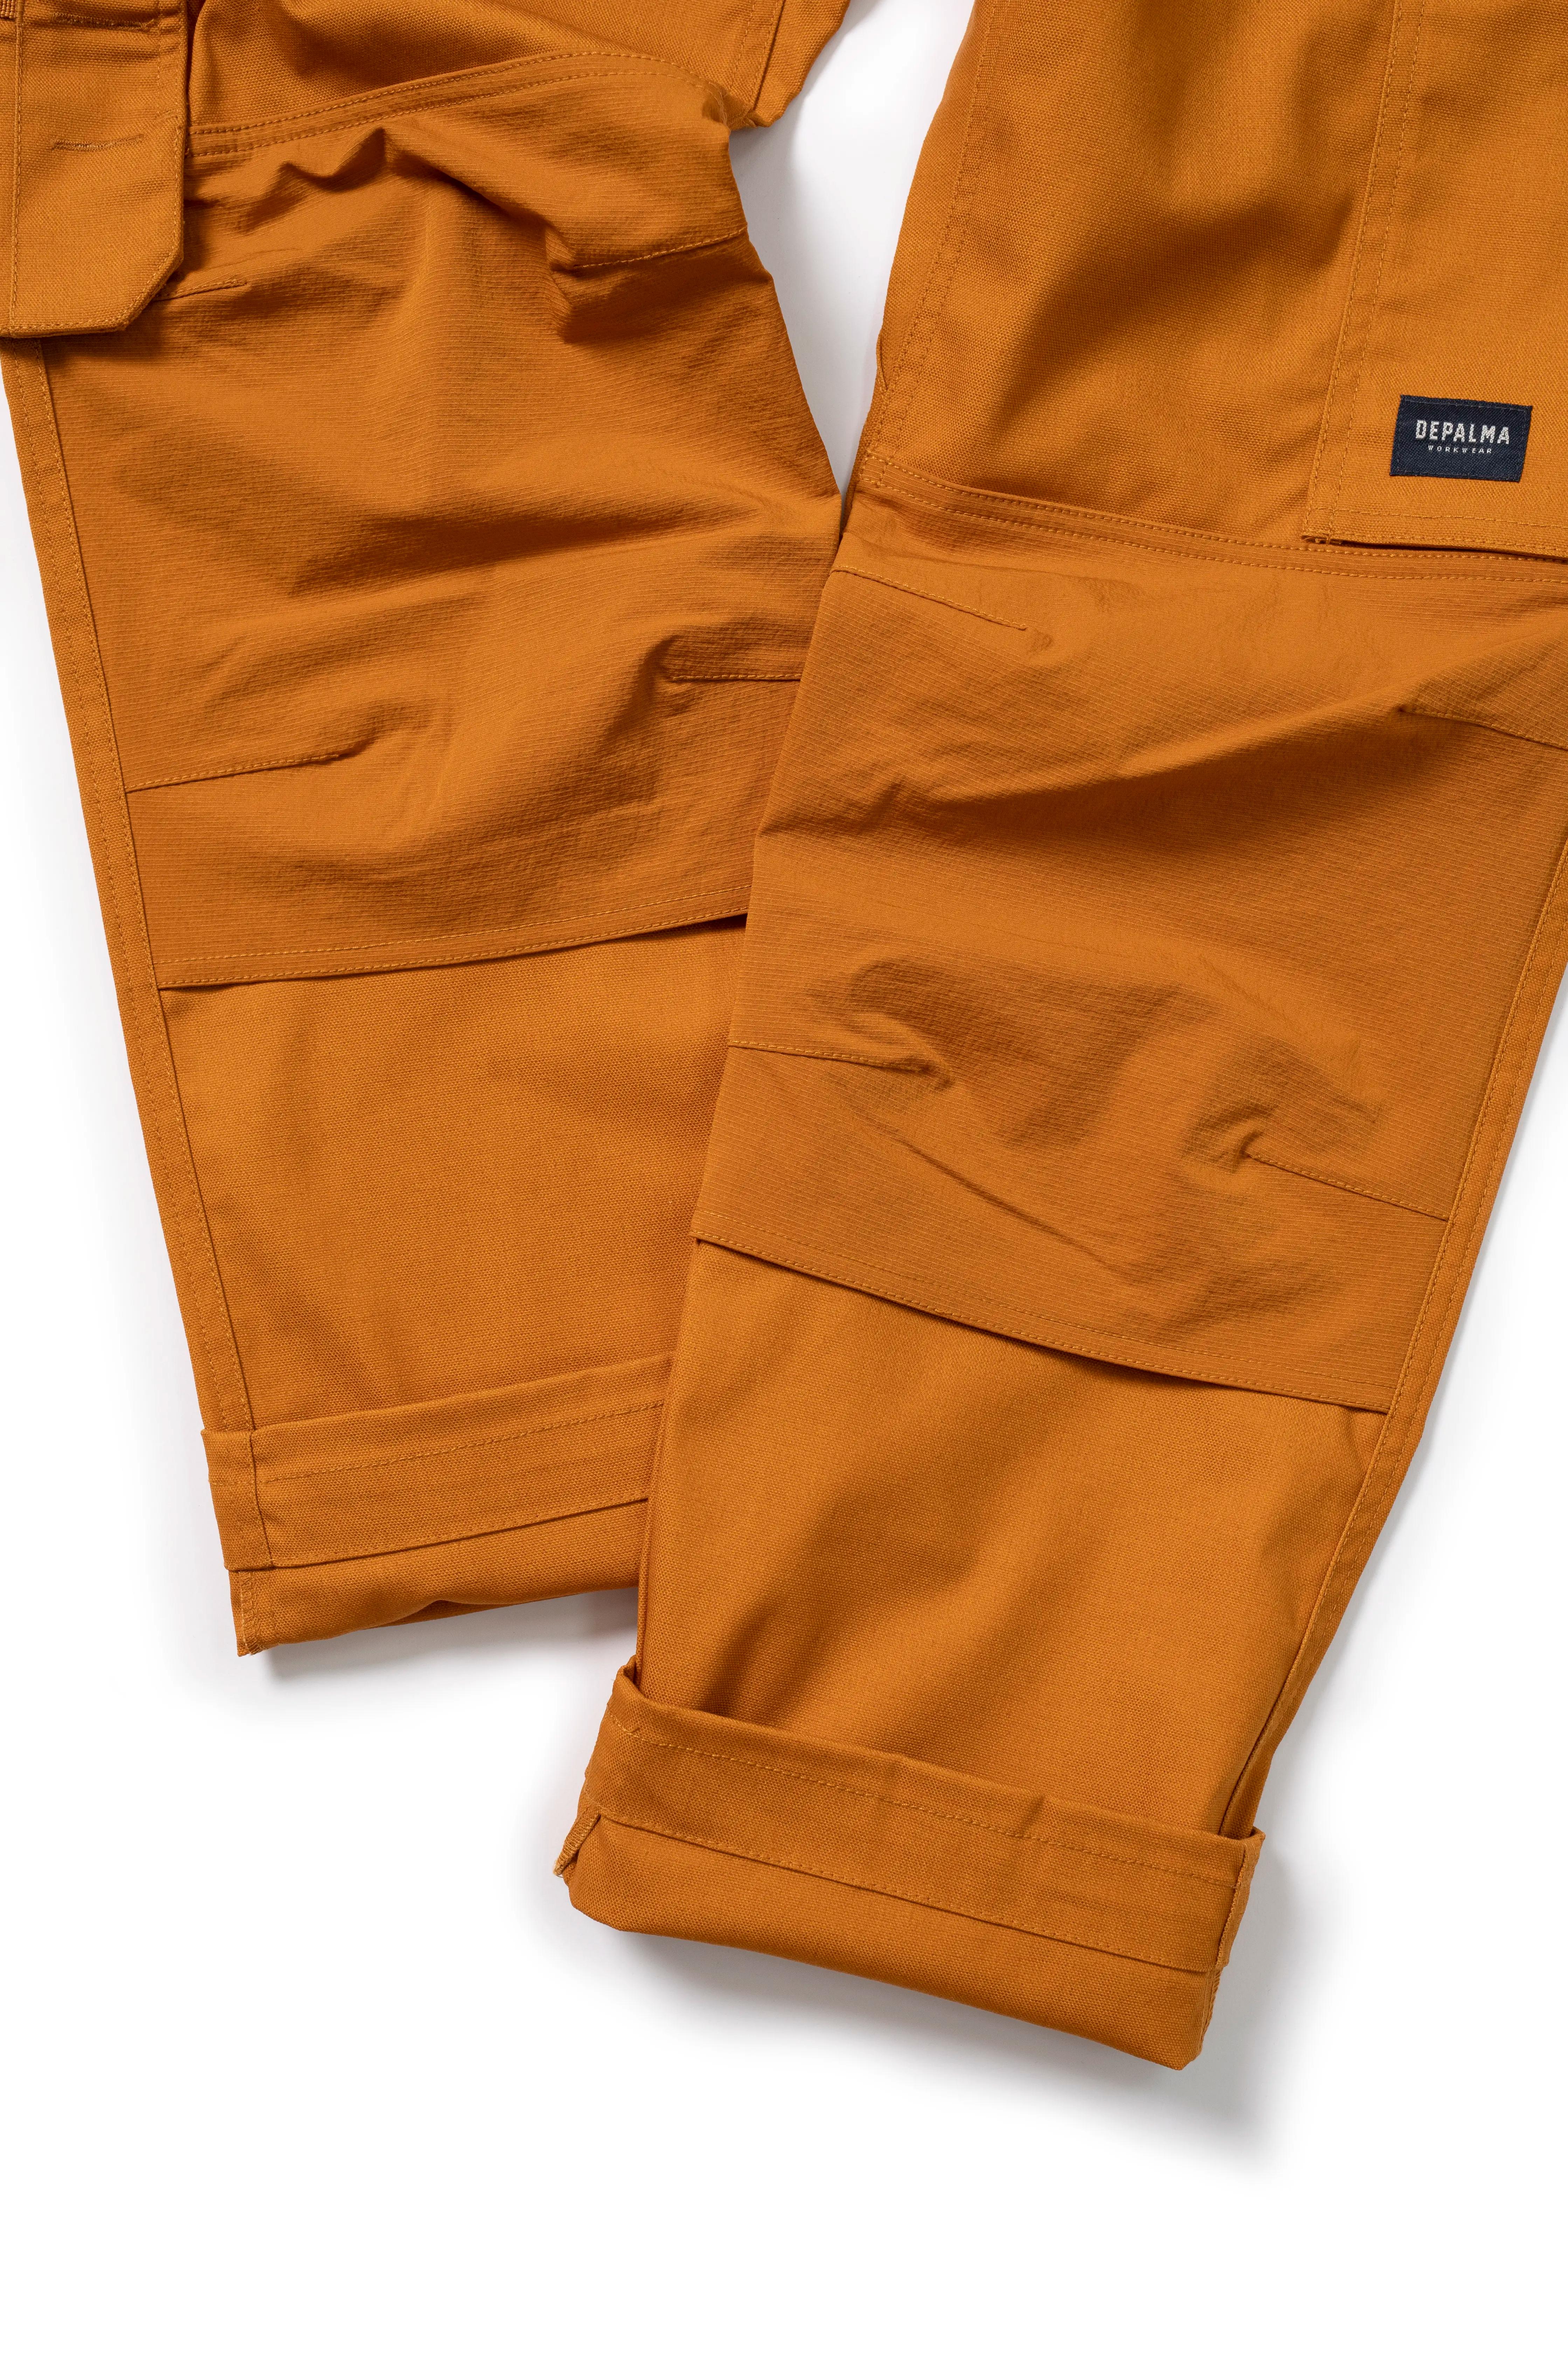 Photo of Grafter Work Pants, Tobacco